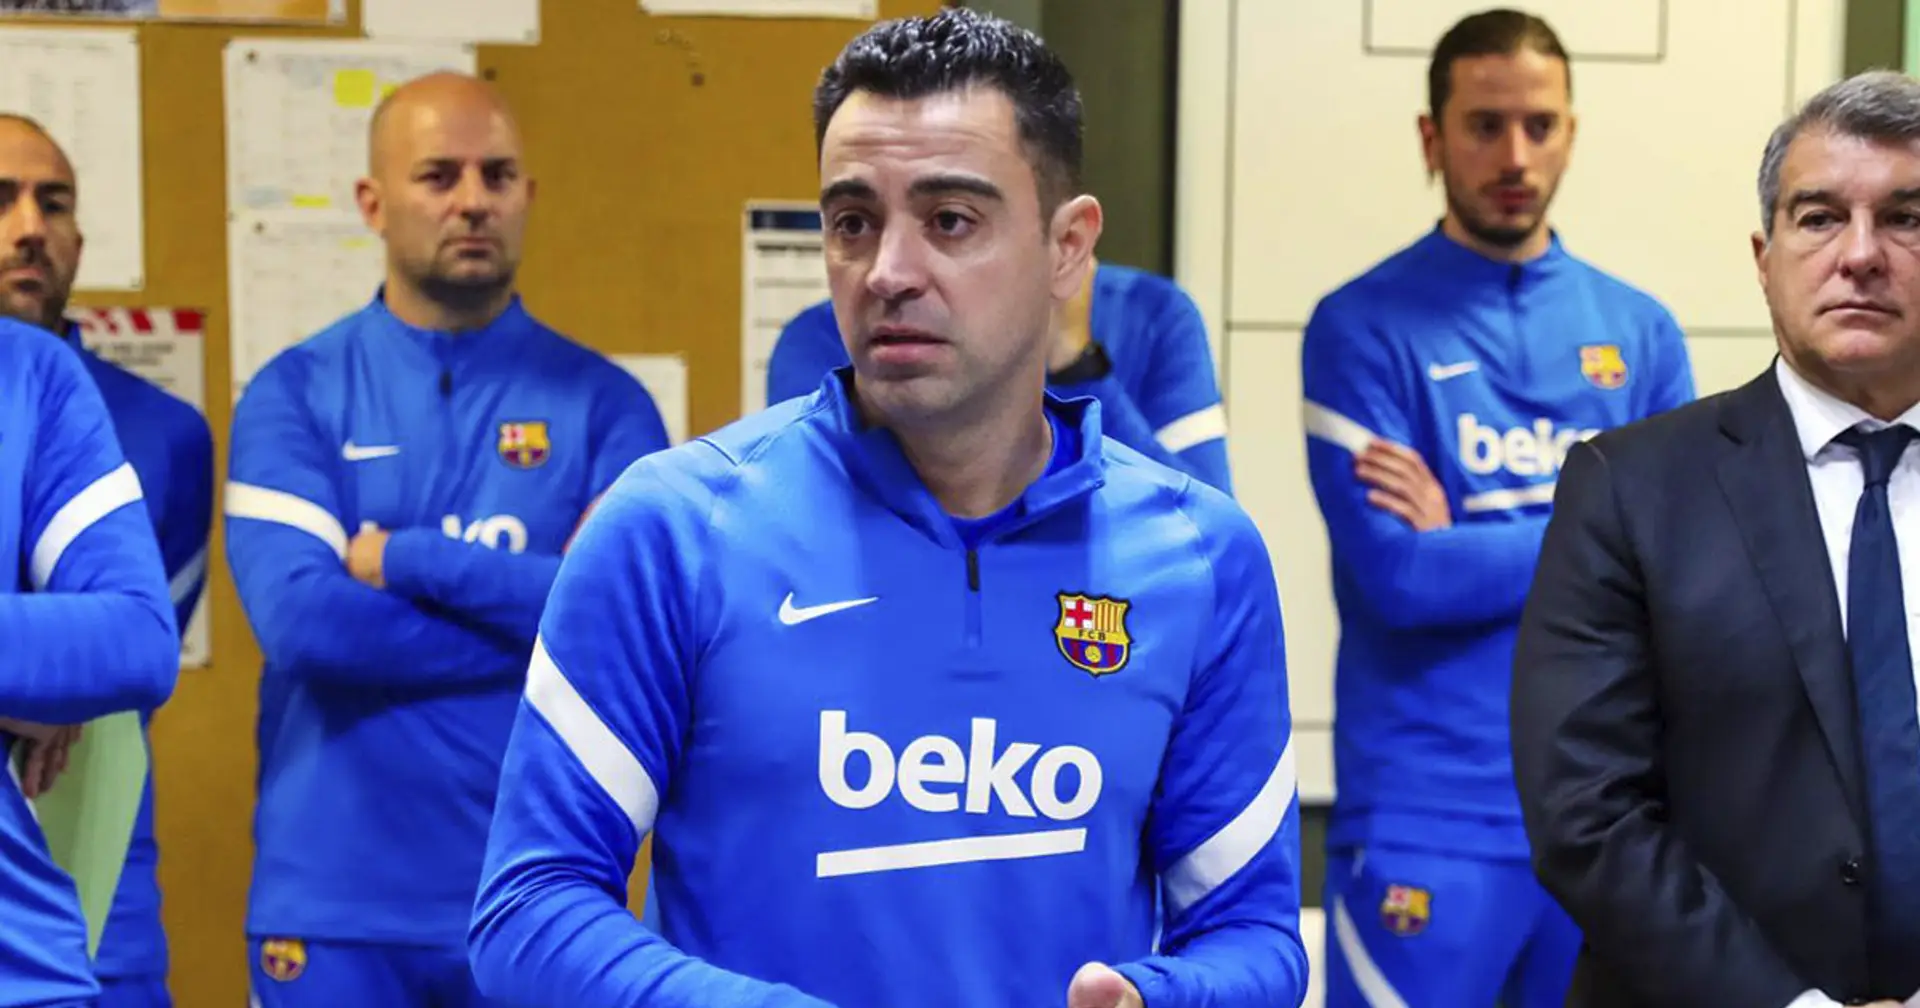 'What happened at Vigo was unacceptable': What Xavi reportedly told Barca players in locker room